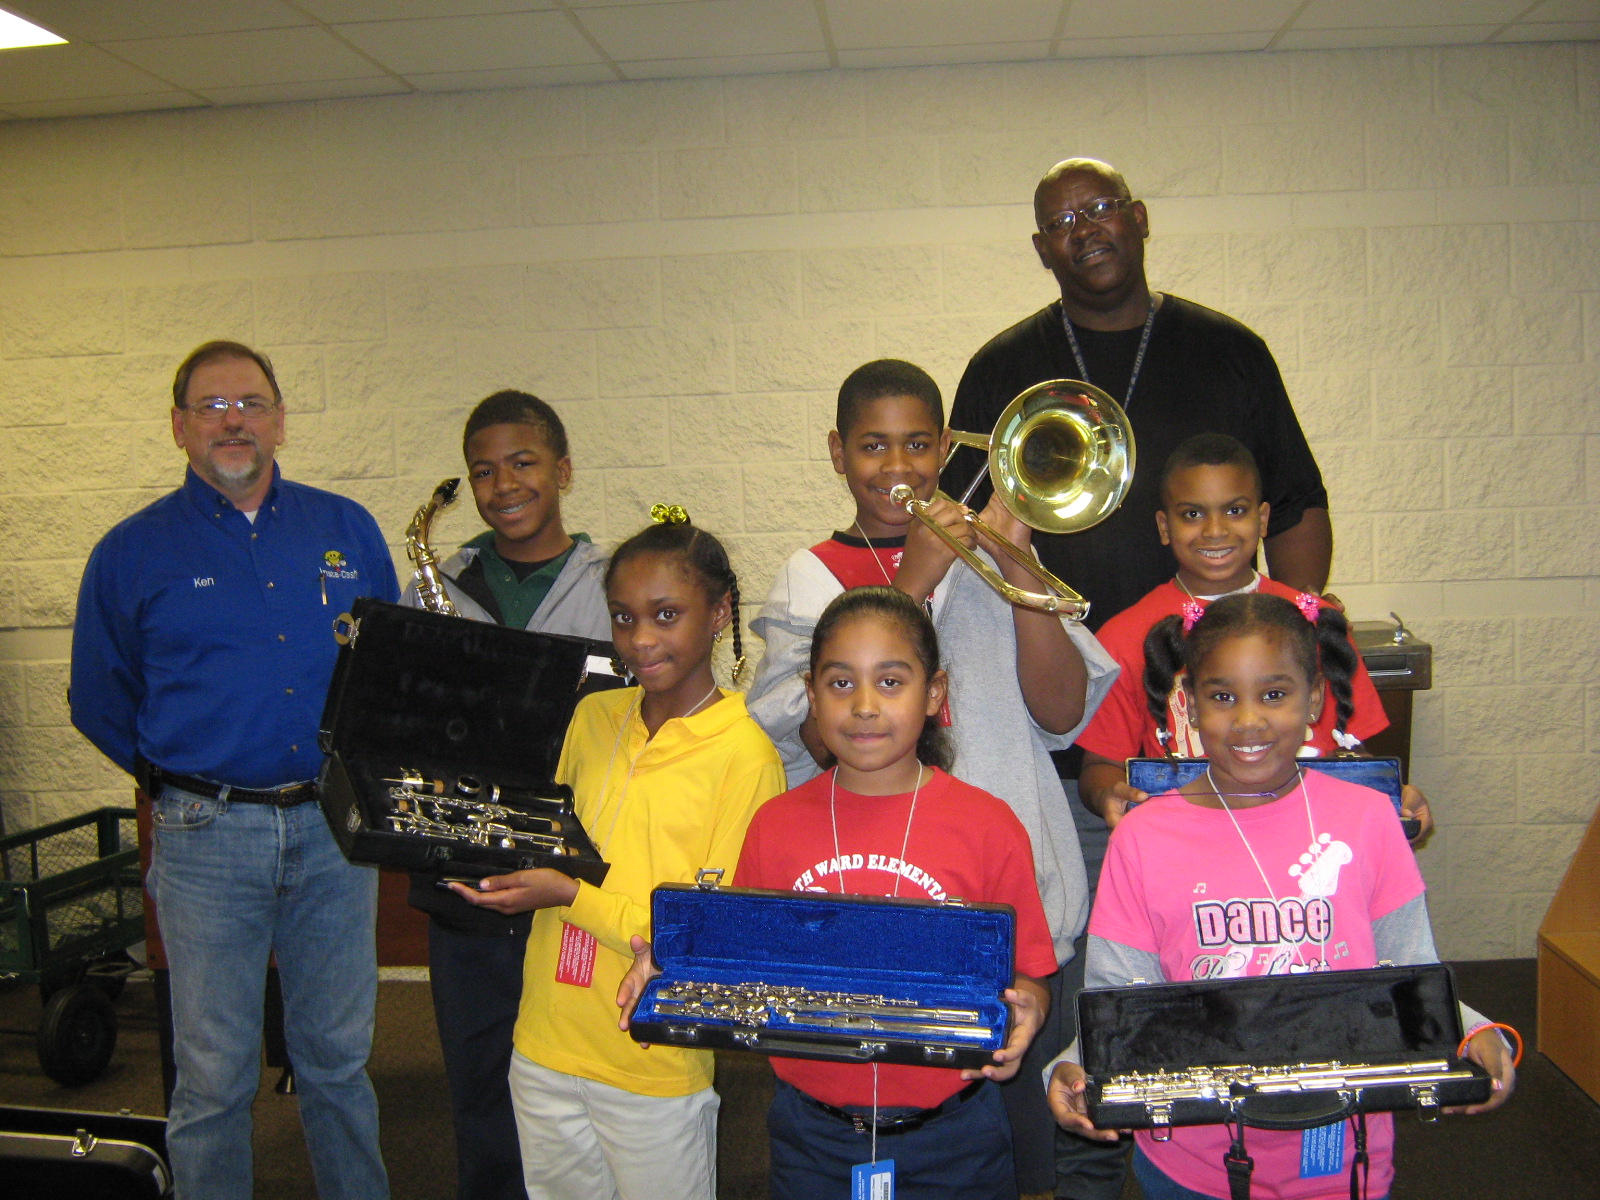 Ken Prine from Insta-Cash Pawn poses with staff and young members of the Longview Texas Boys & Girls Club. The children hold various band instruments.